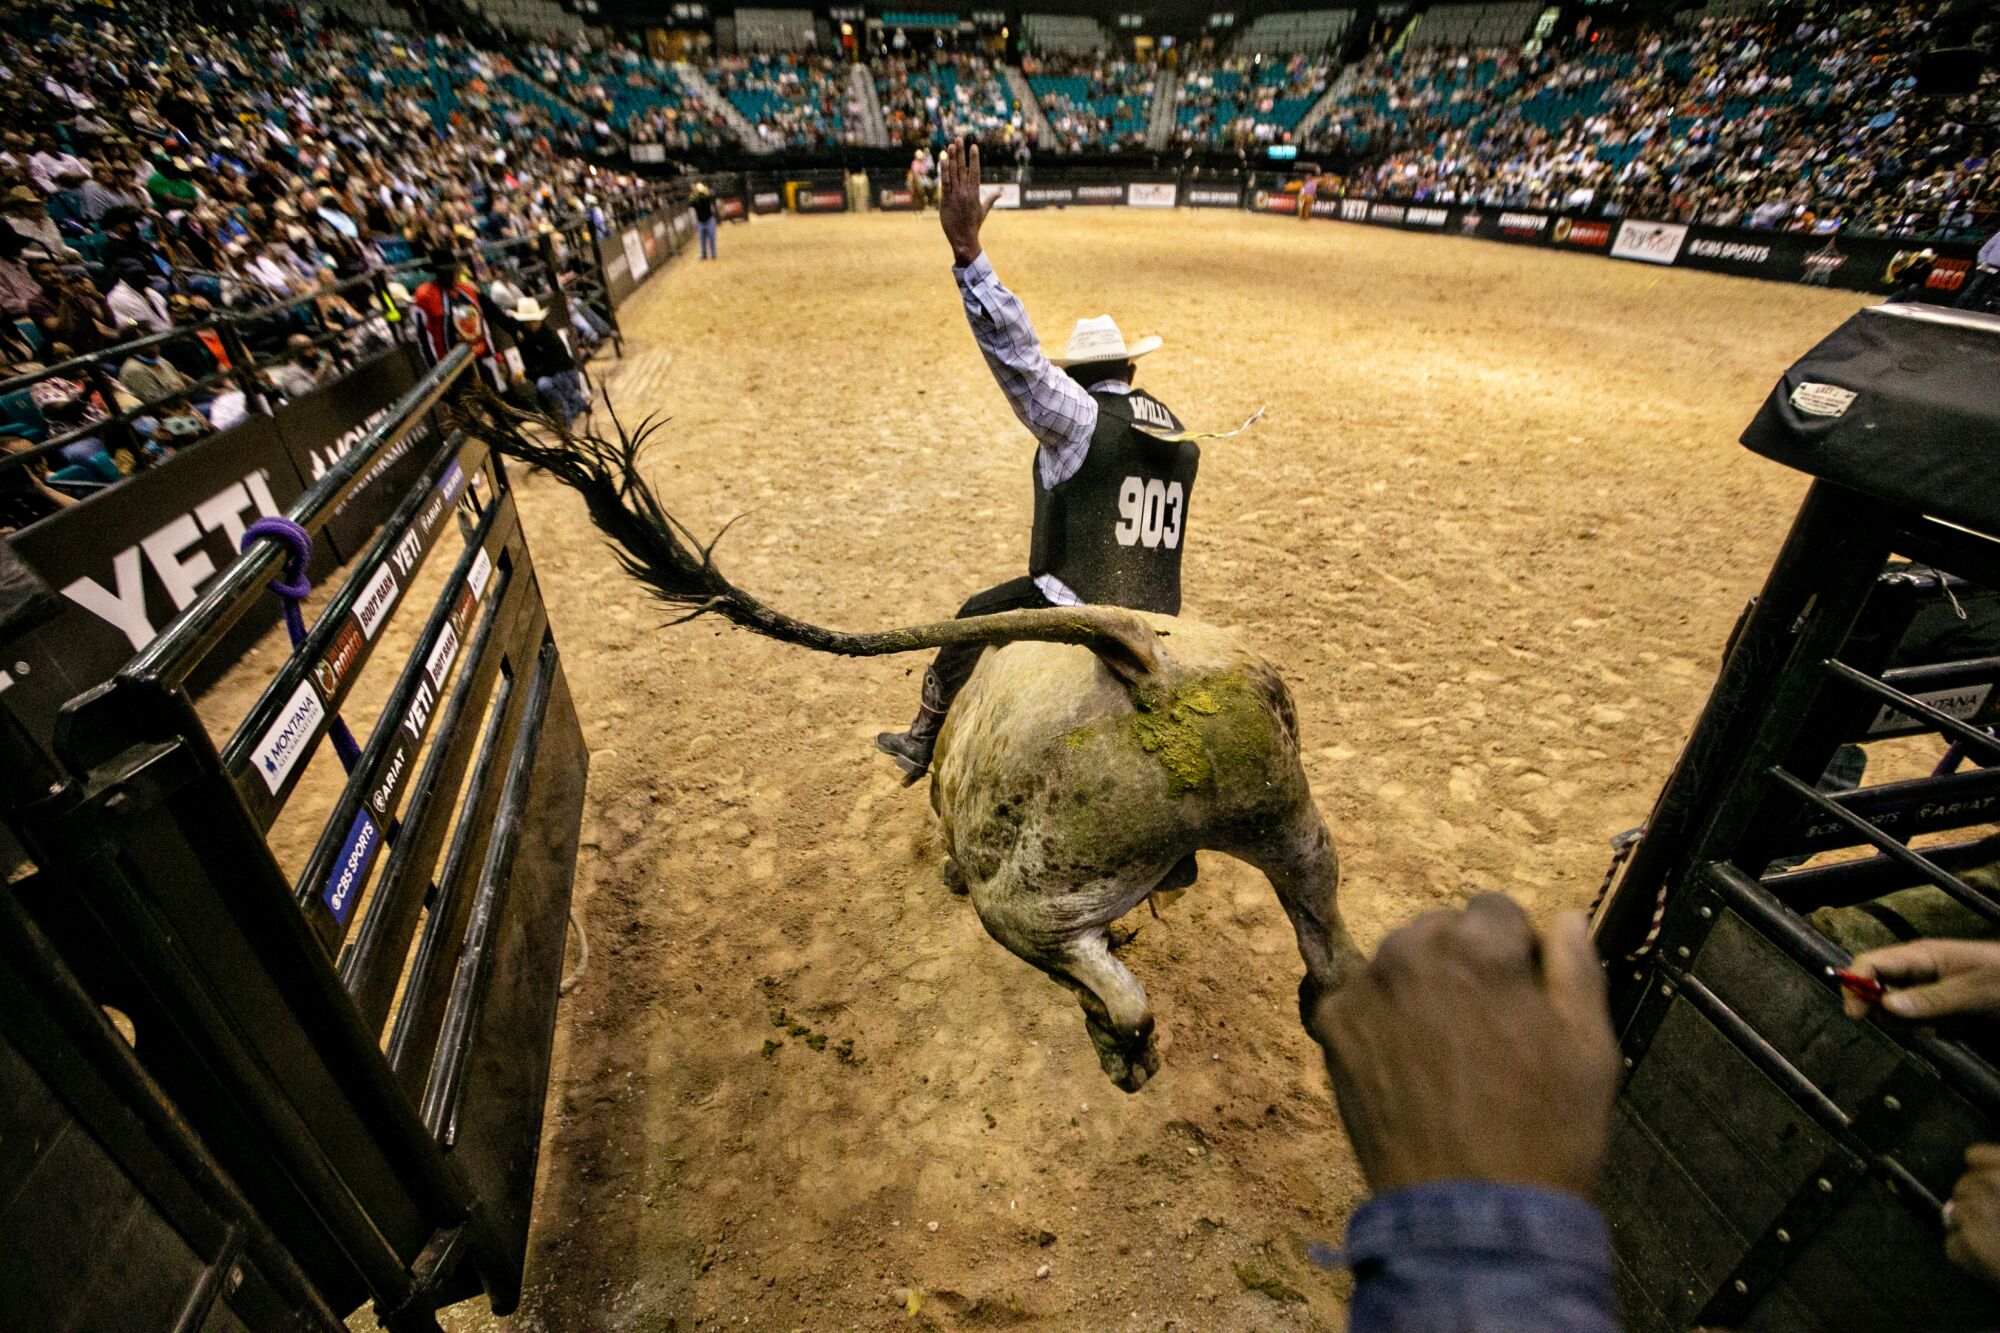 A rider raising one hand while the other holds on to a bull as it runs from a chute into a rodeo arena with packed stands